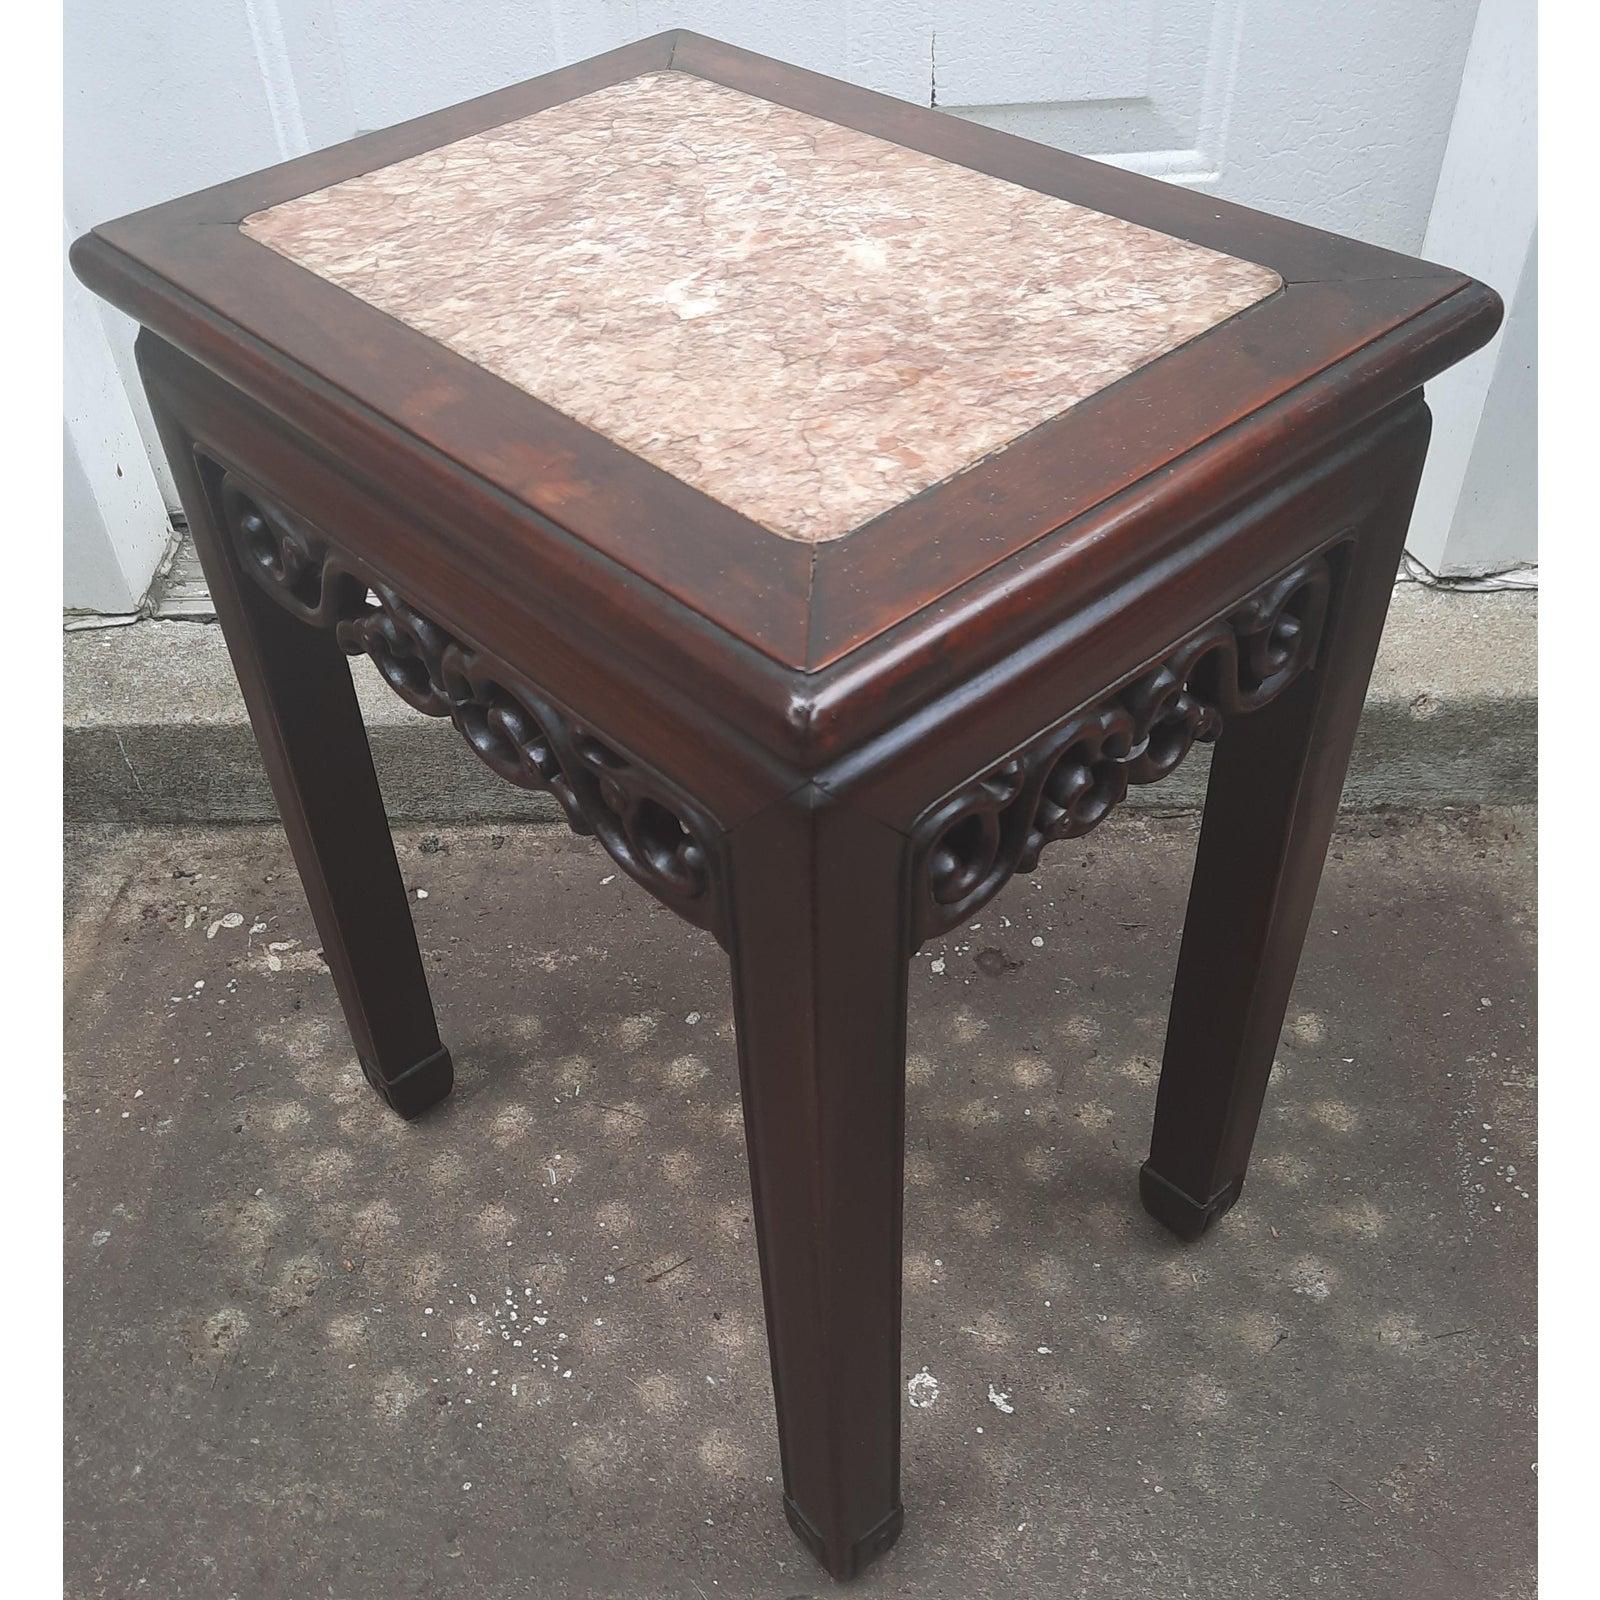 Carved Mahogany side table with rich marble top. May be used as a lamp table or as a plant stand as well.
Carved on all 4 sides. Oriental accent. Very good vintage condition. Measures 16.25